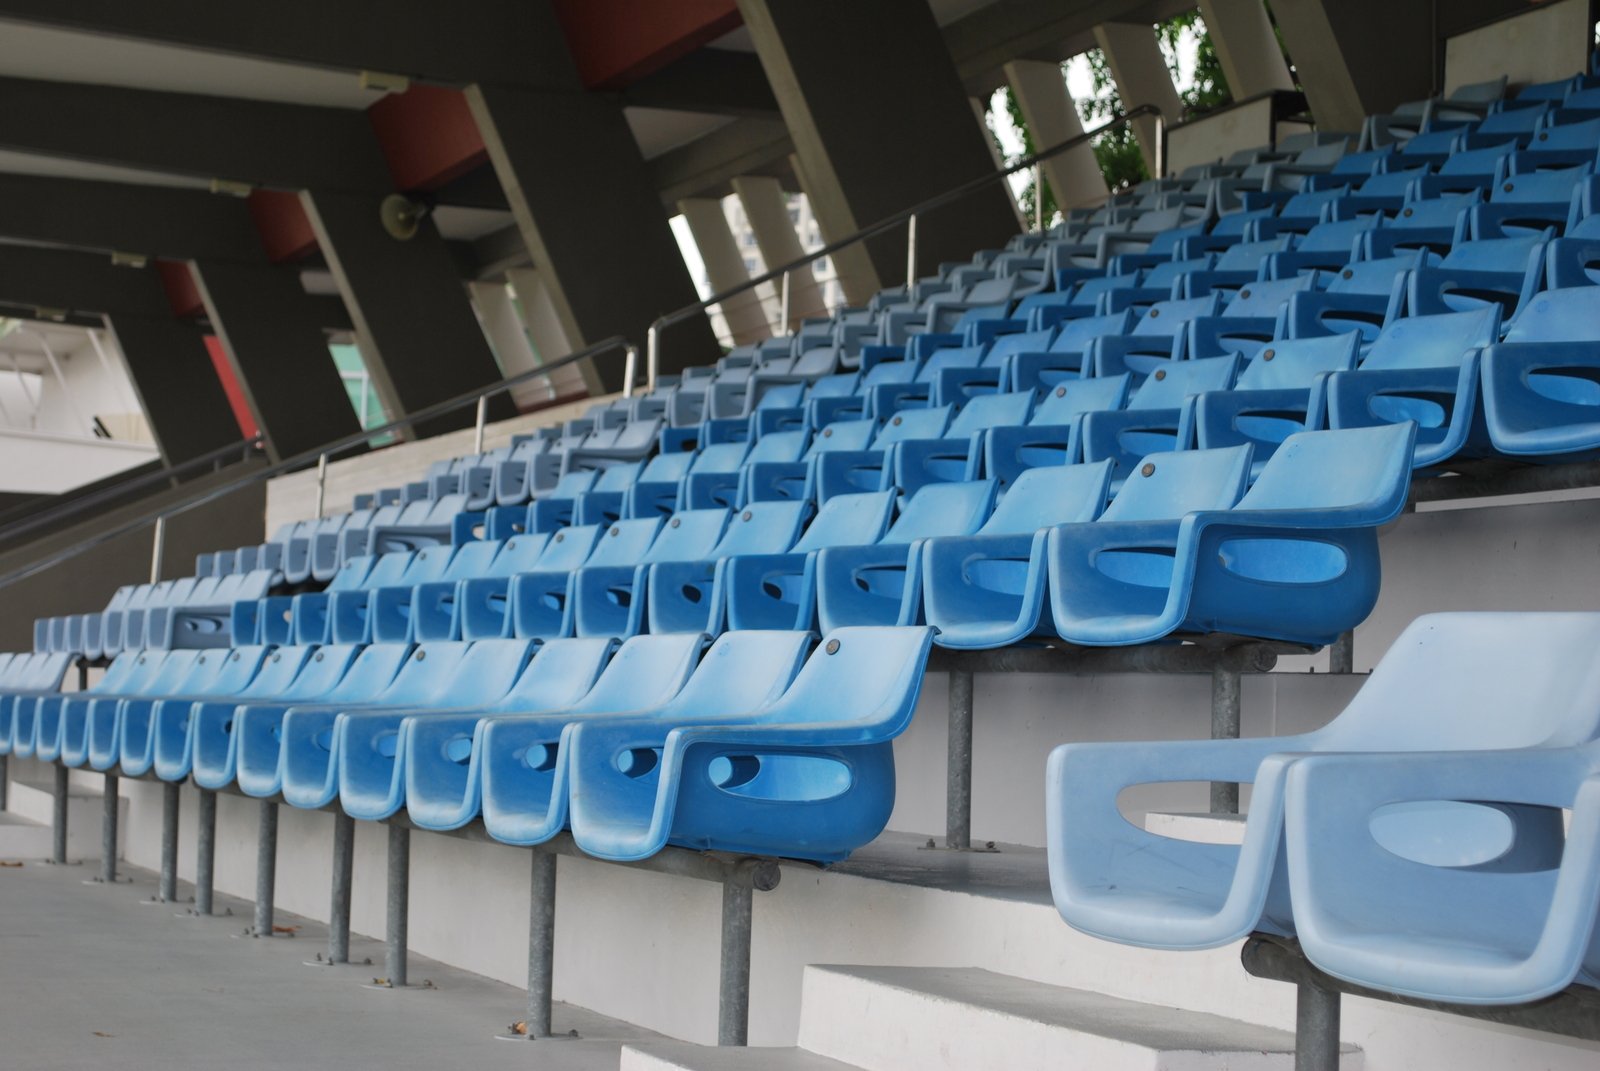 an empty row of blue chairs in the bleachers